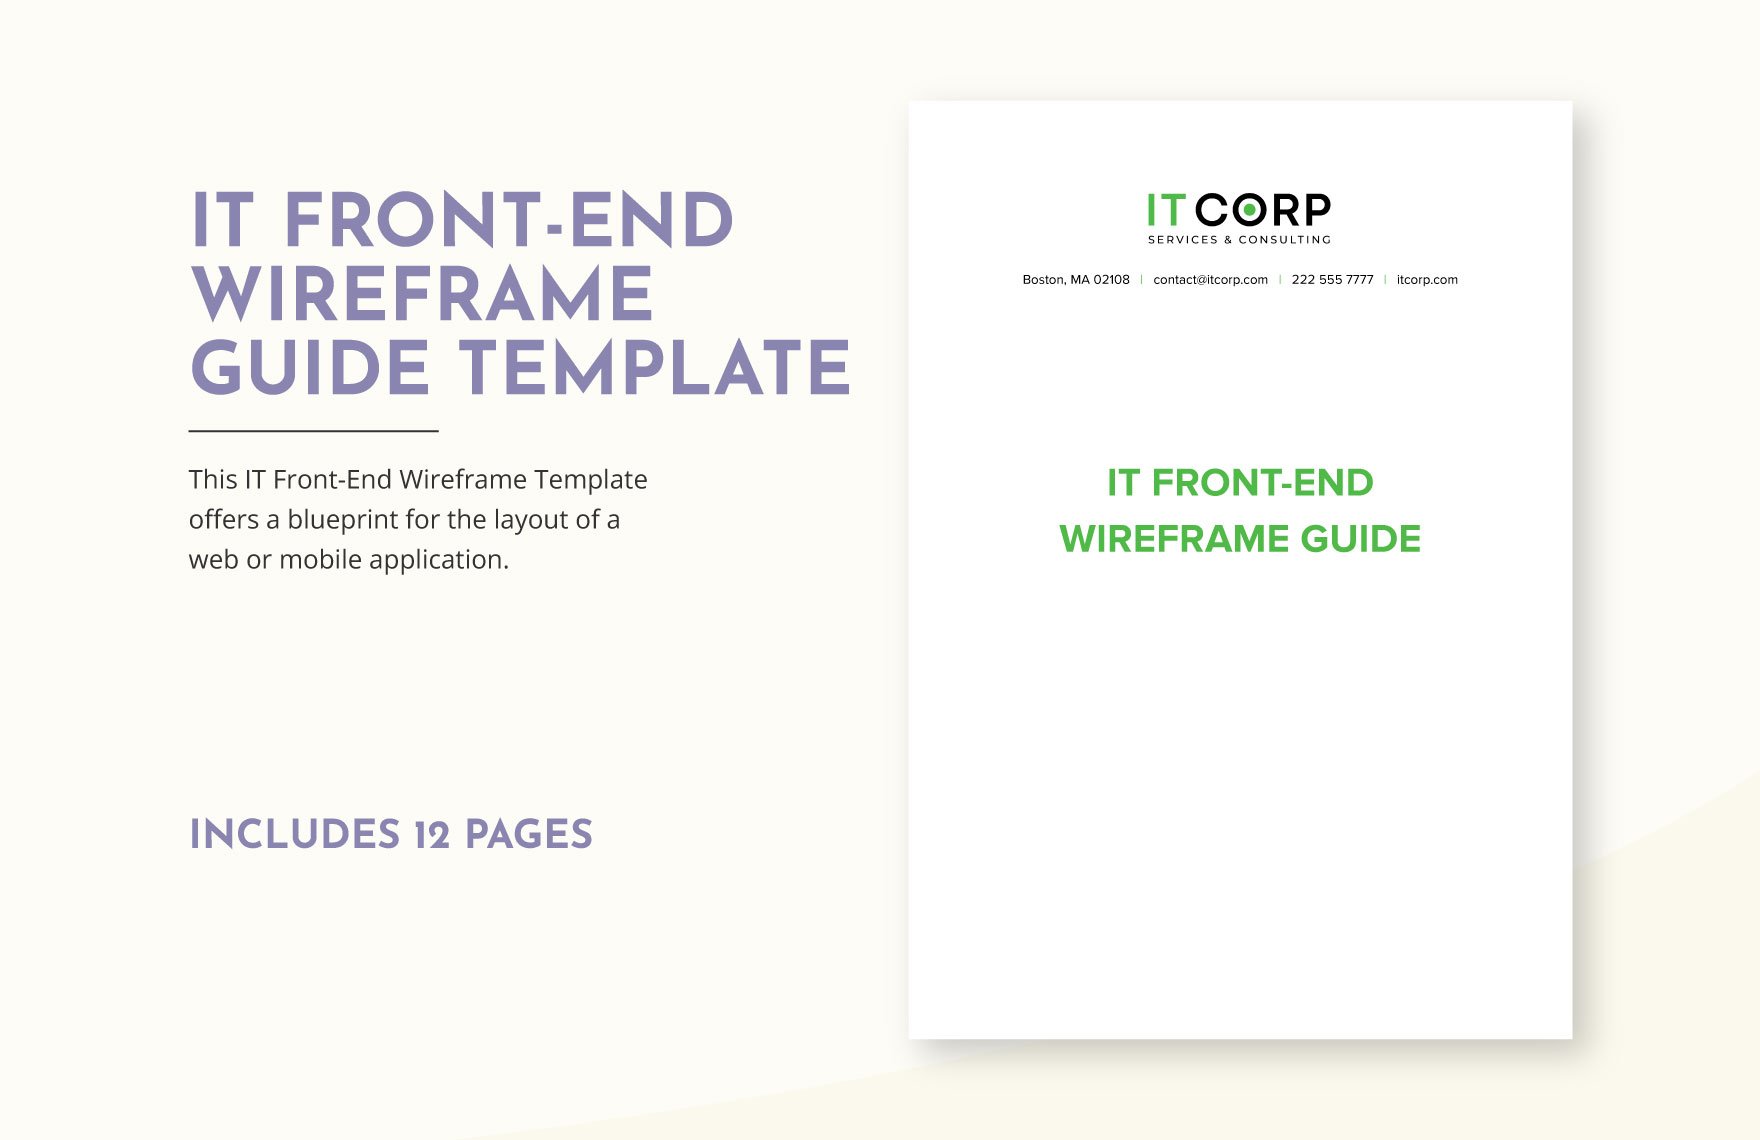 IT Front-End Wireframe Guide Template in Word, Google Docs, PDF